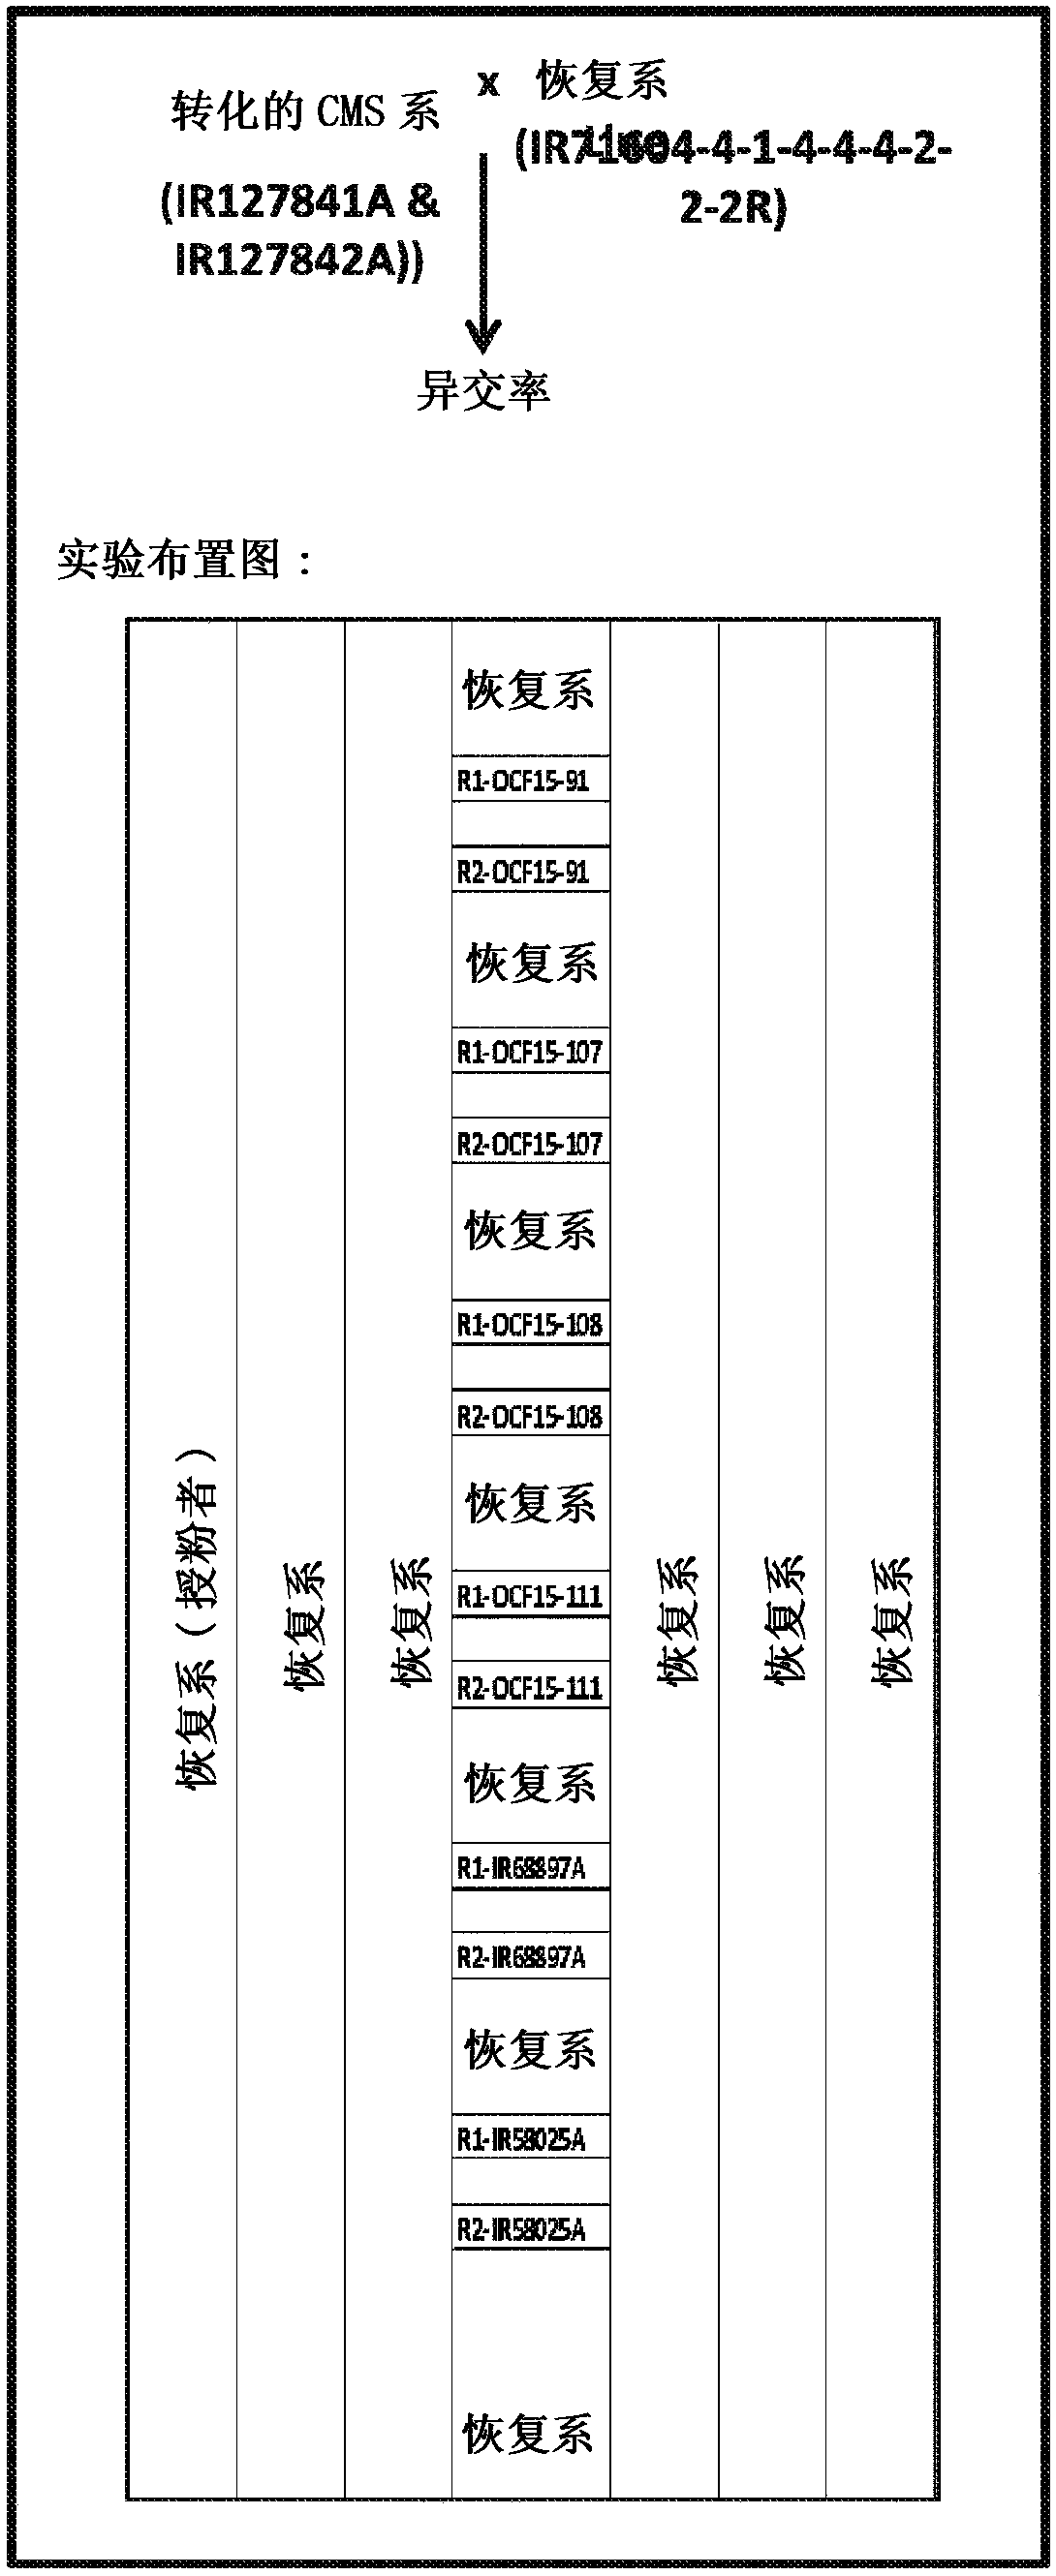 Increasing hybrid seed production through higher outcrossing rate in cytoplasmic male sterile rice and related materials and methods